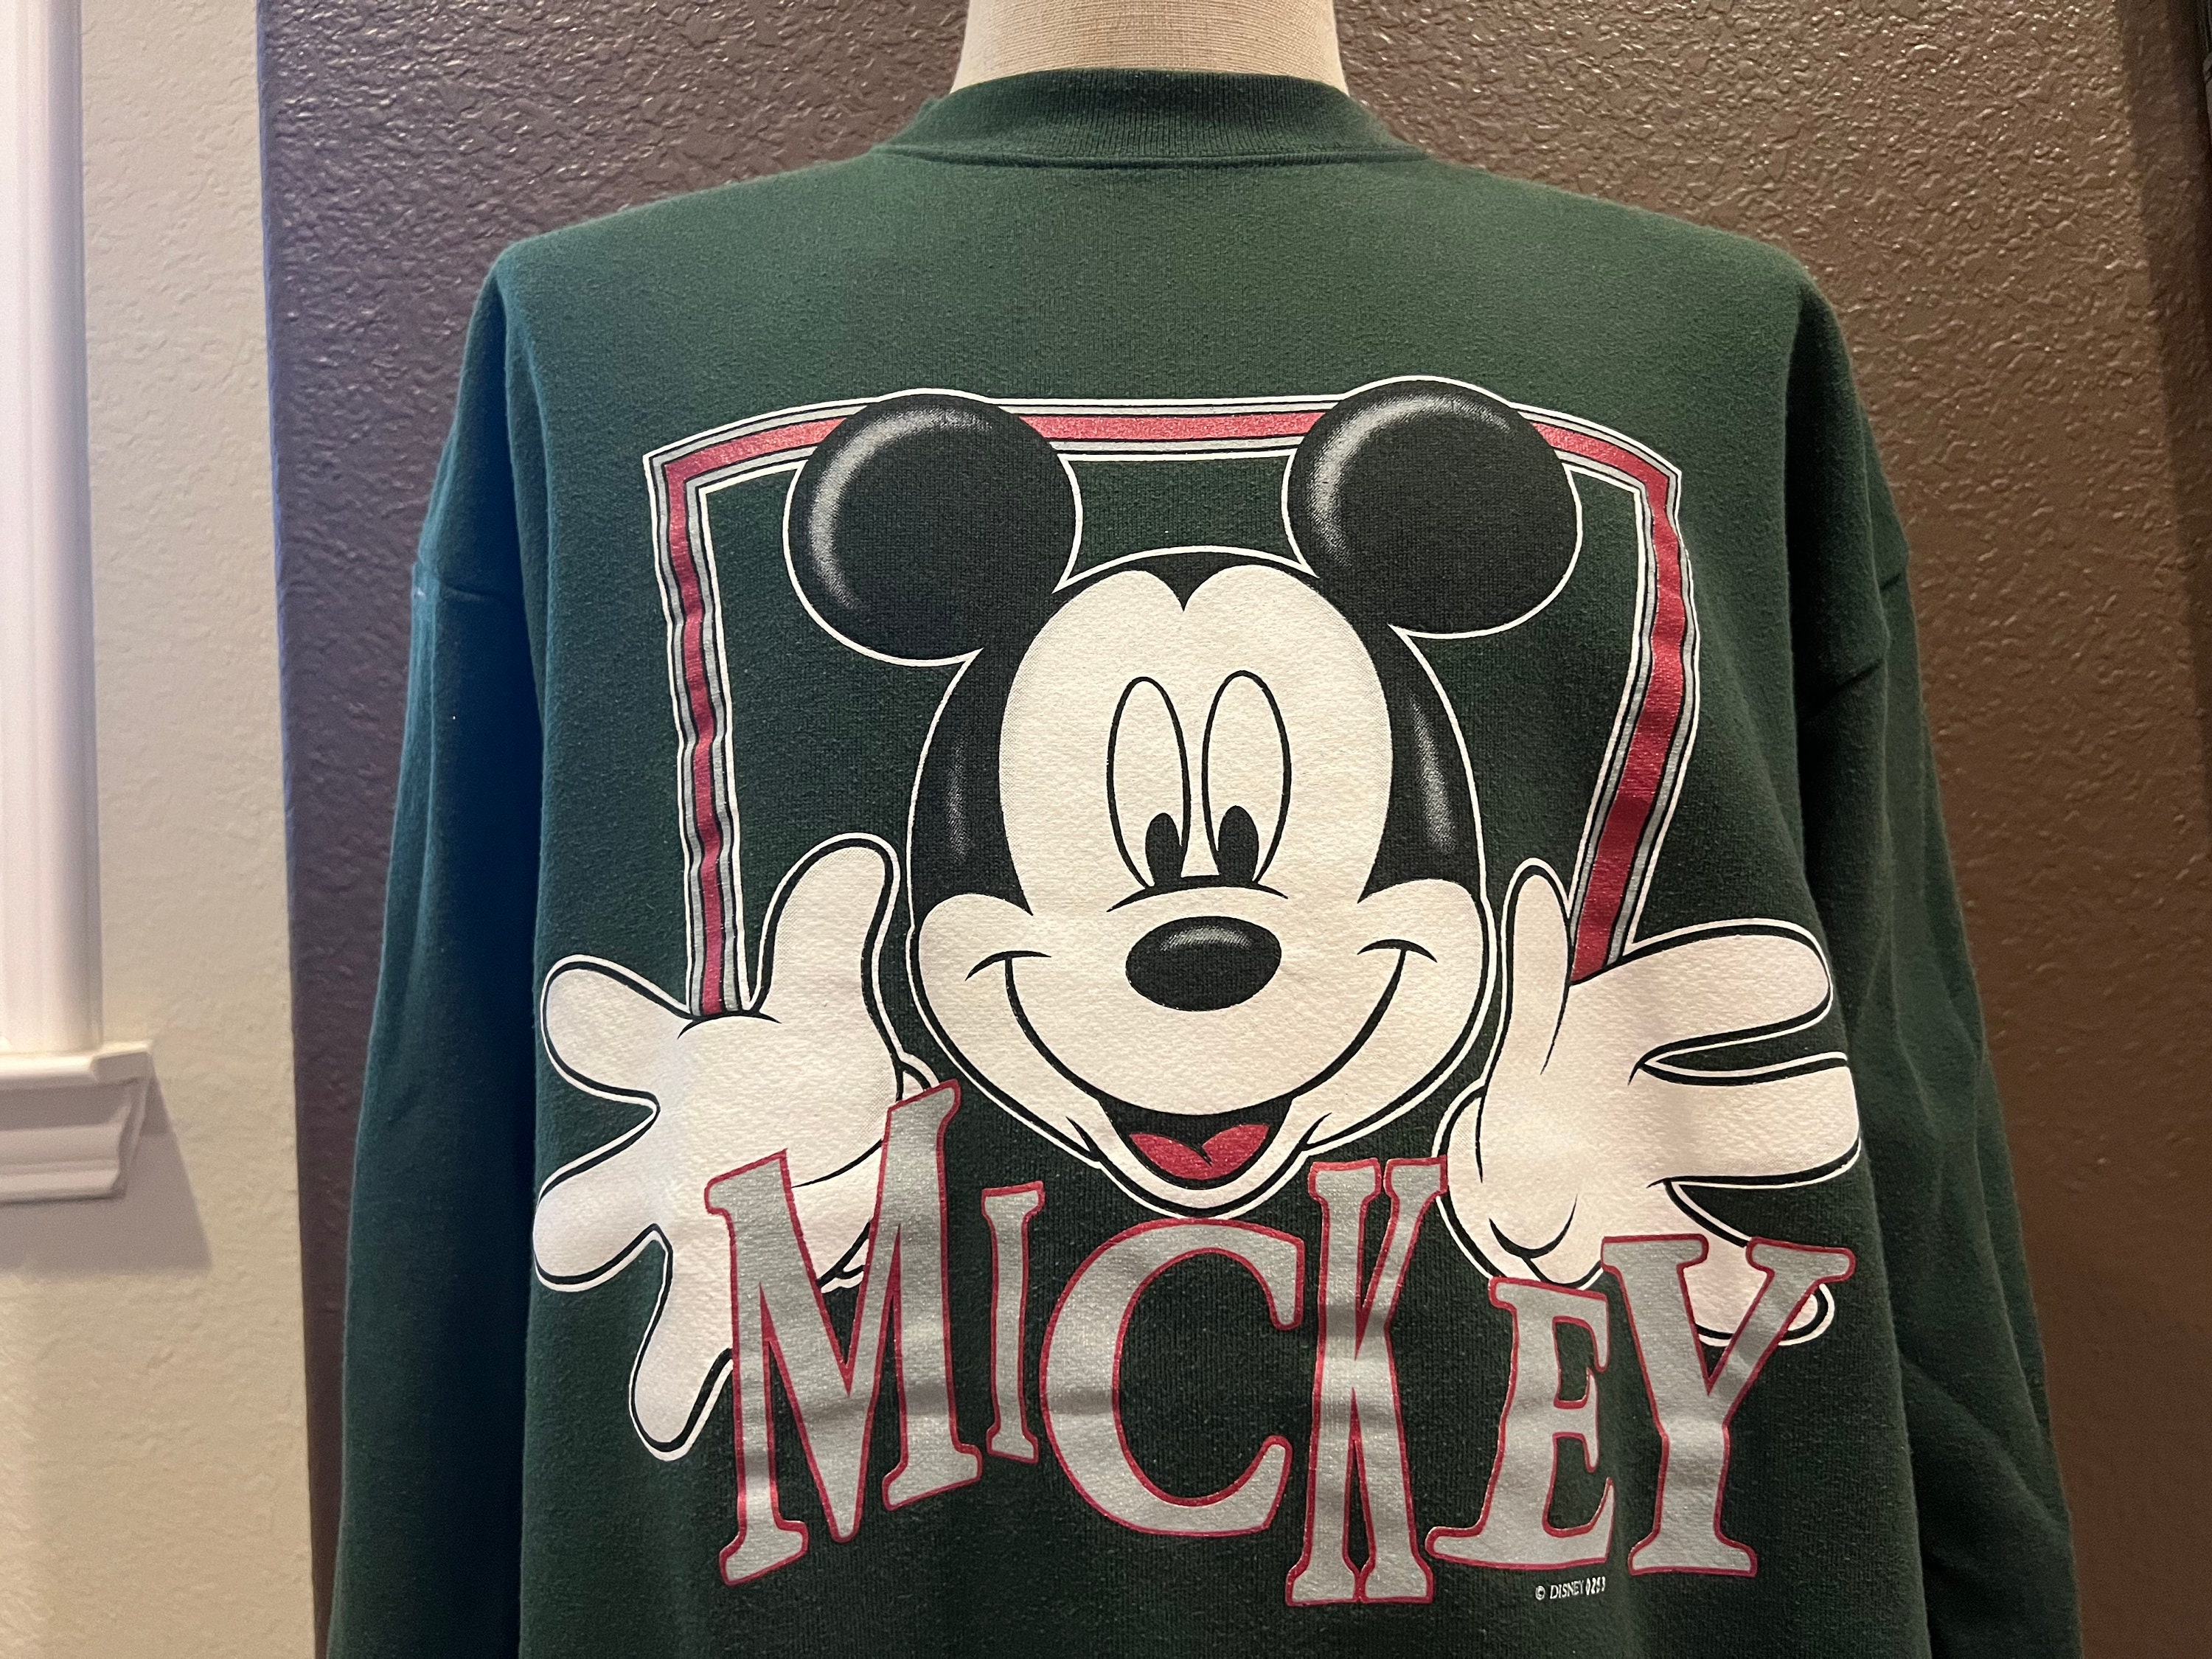 Vtg 90's Disney Mickey Mouse 2 Sided White Red Sleep Stuff PJ's Fit Adult M  Nice